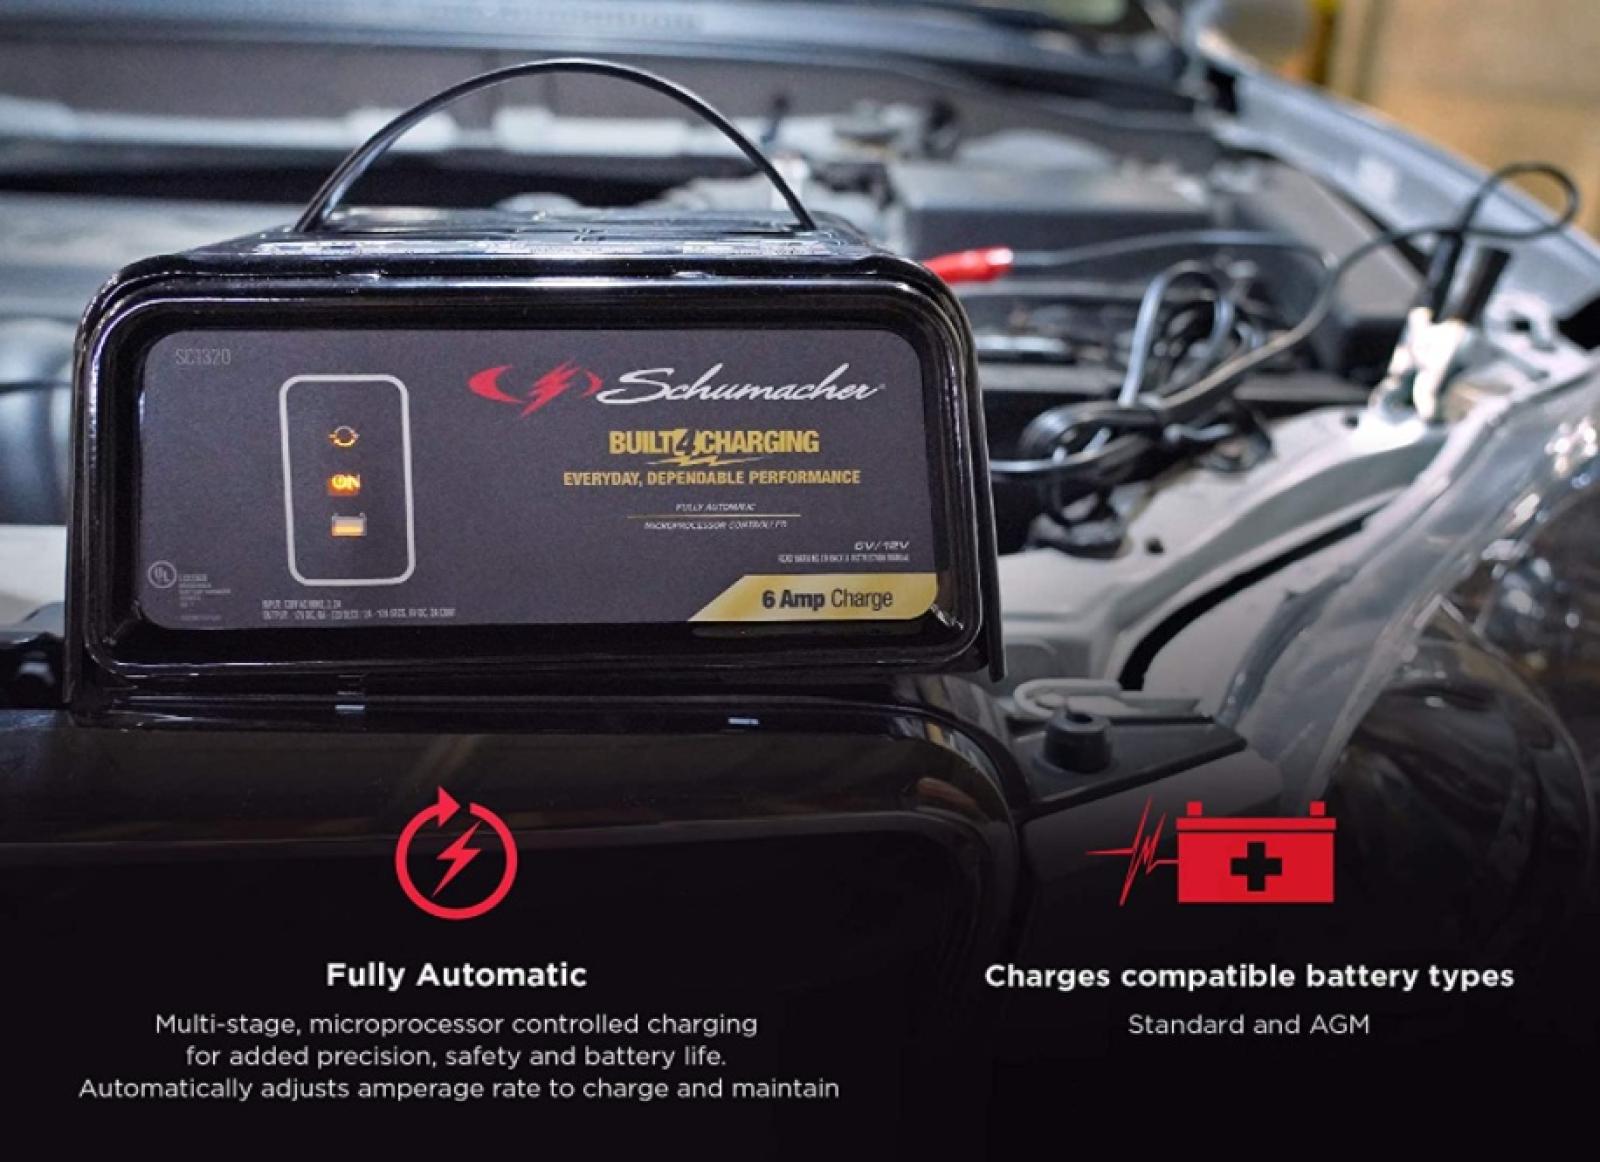 Schumacher Fully Automatic 6 Amp Battery Charger, Maintainer, and Auto Desulfator